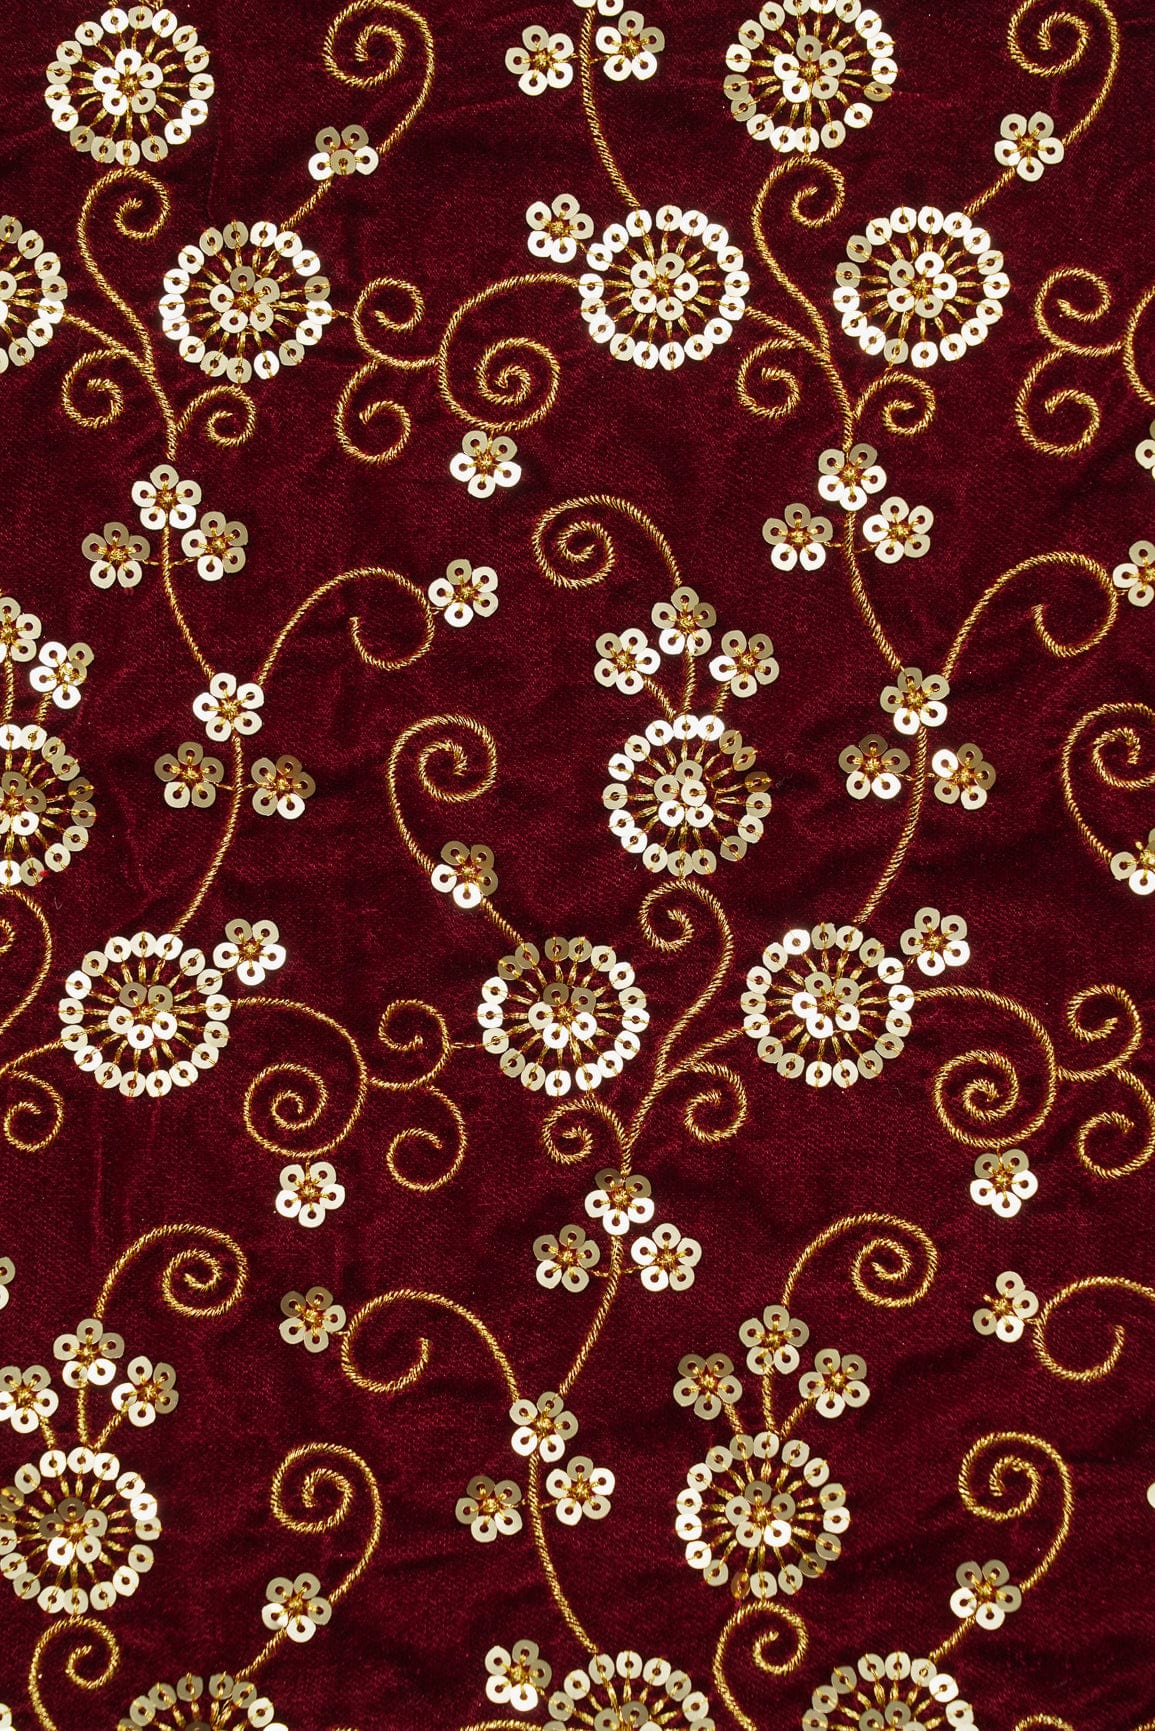 doeraa Embroidery Fabrics Gold Sequins With Gold Thread Embroidery On Maroon Velvet